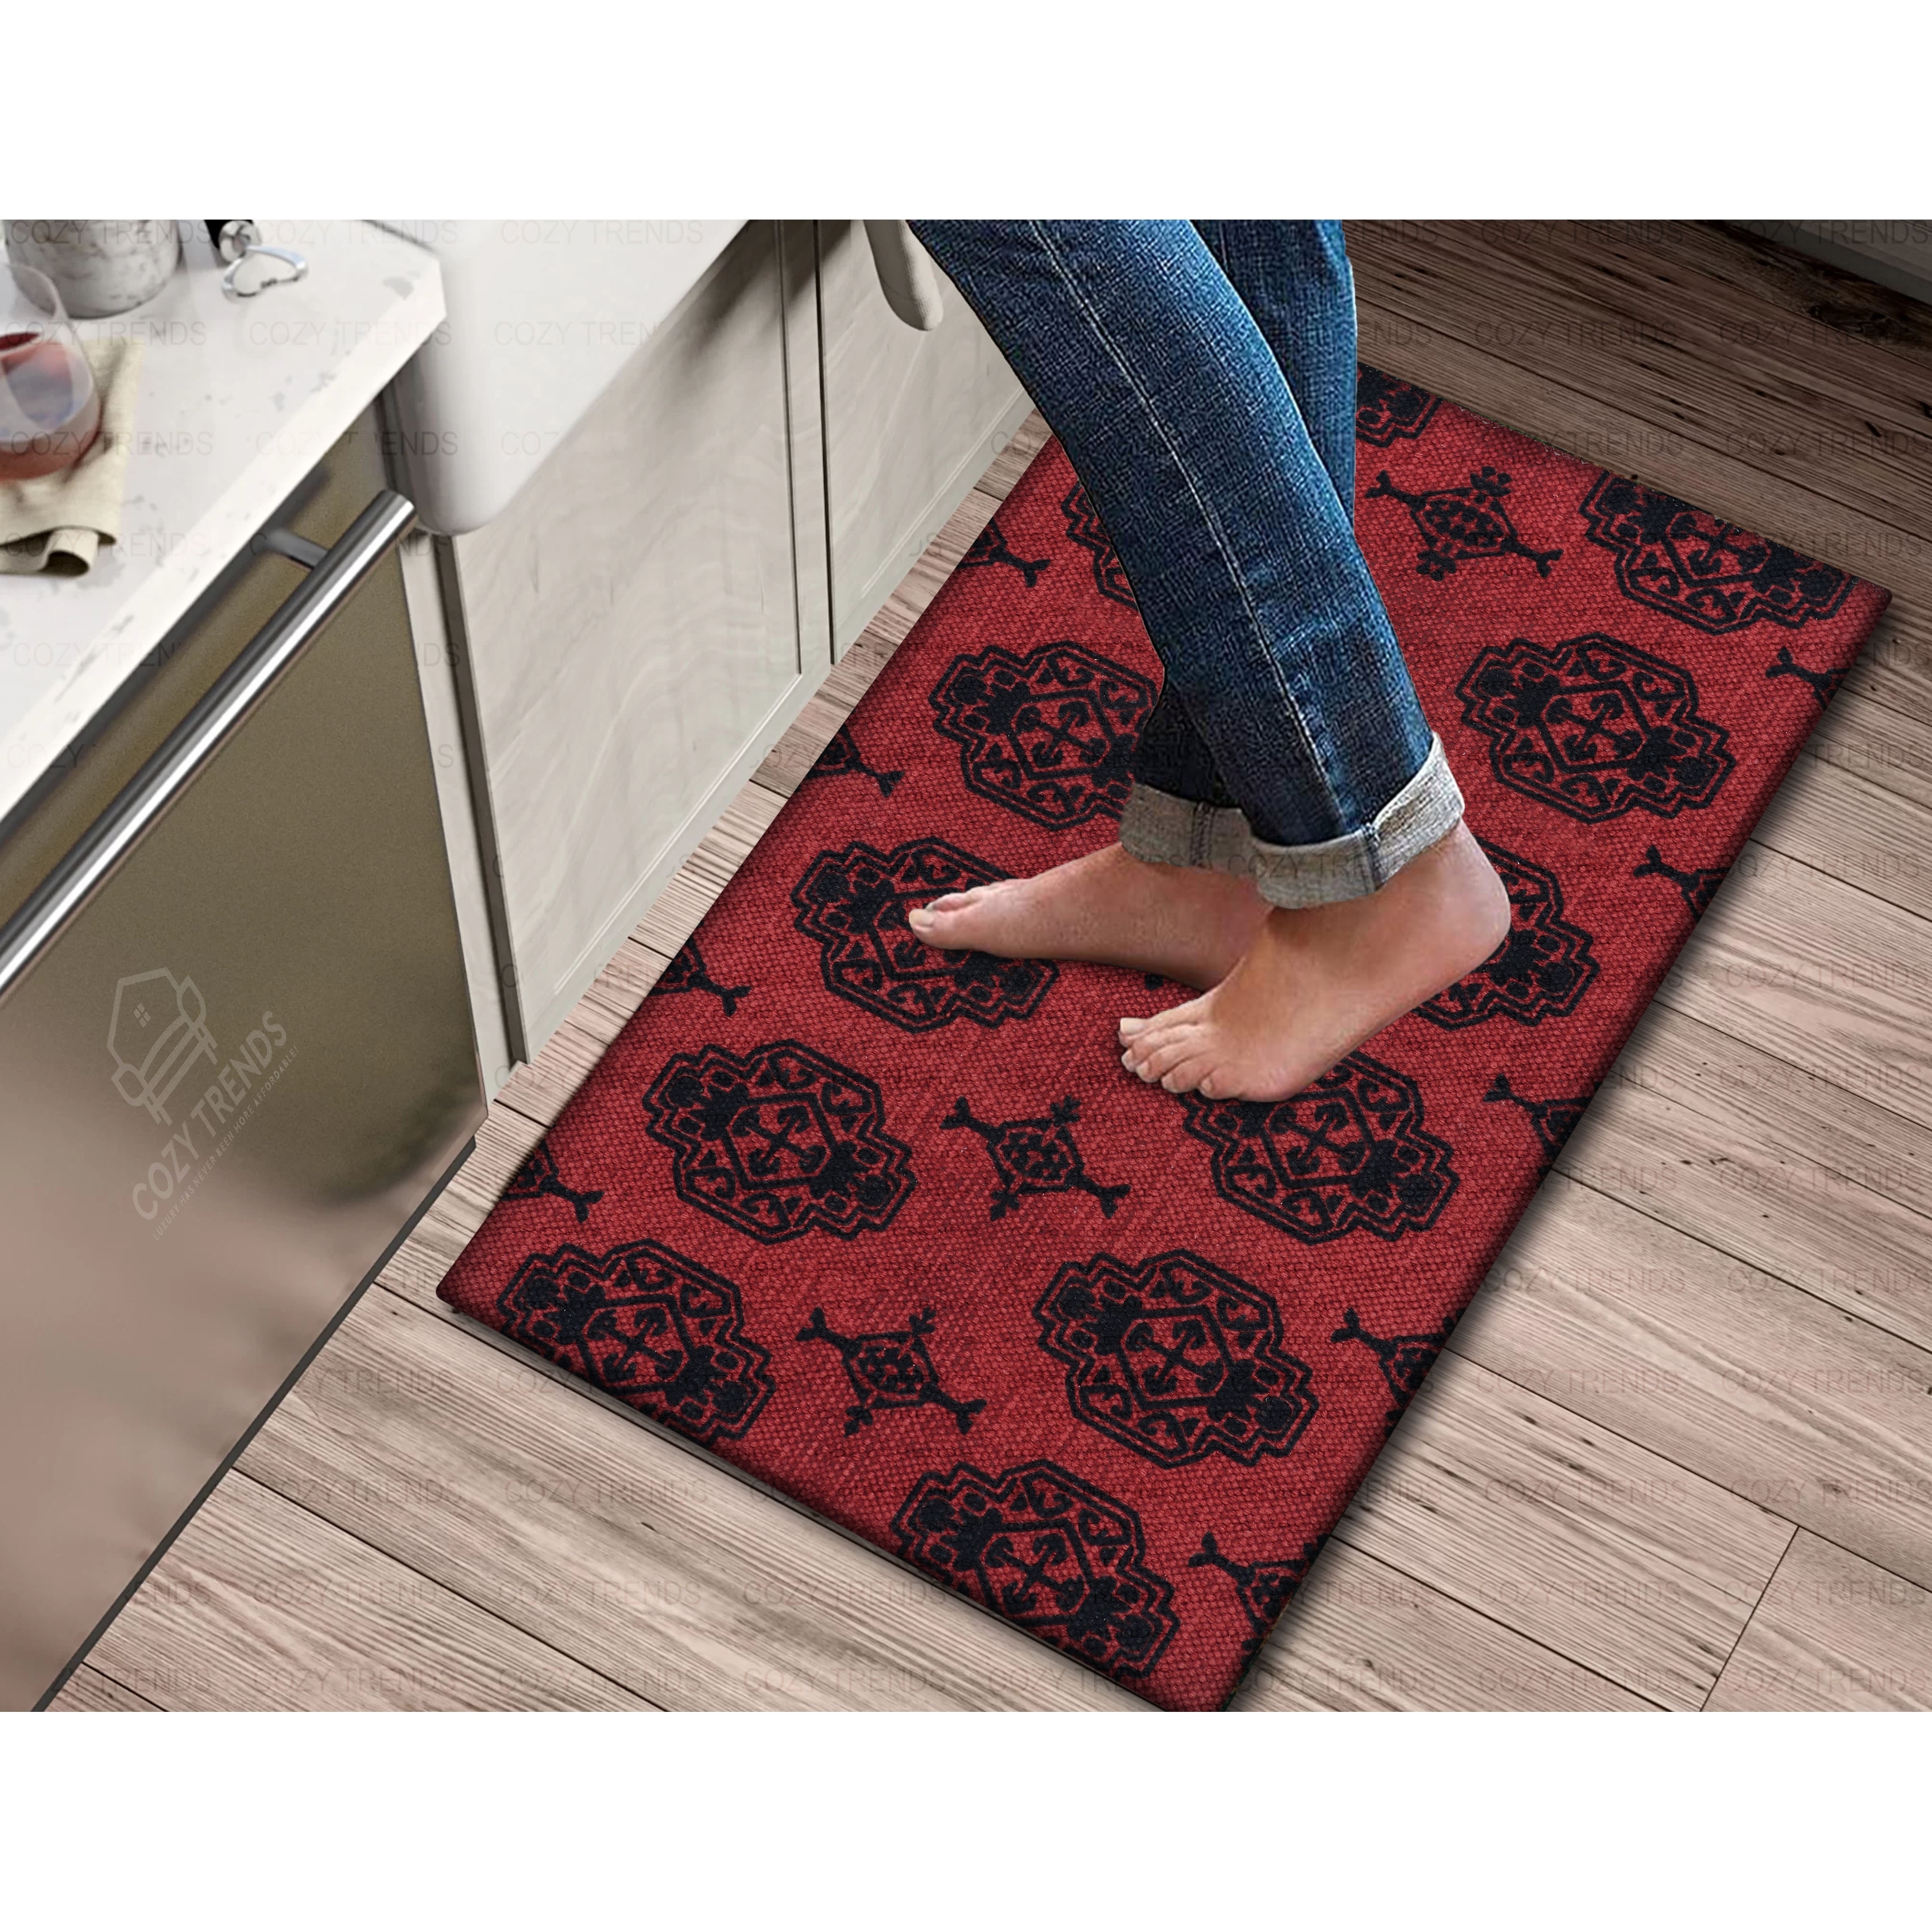 Anti Fatigue Kitchen Mats for Floor 2 Piece Set Memory Foam Cushioned Rugs  SALE